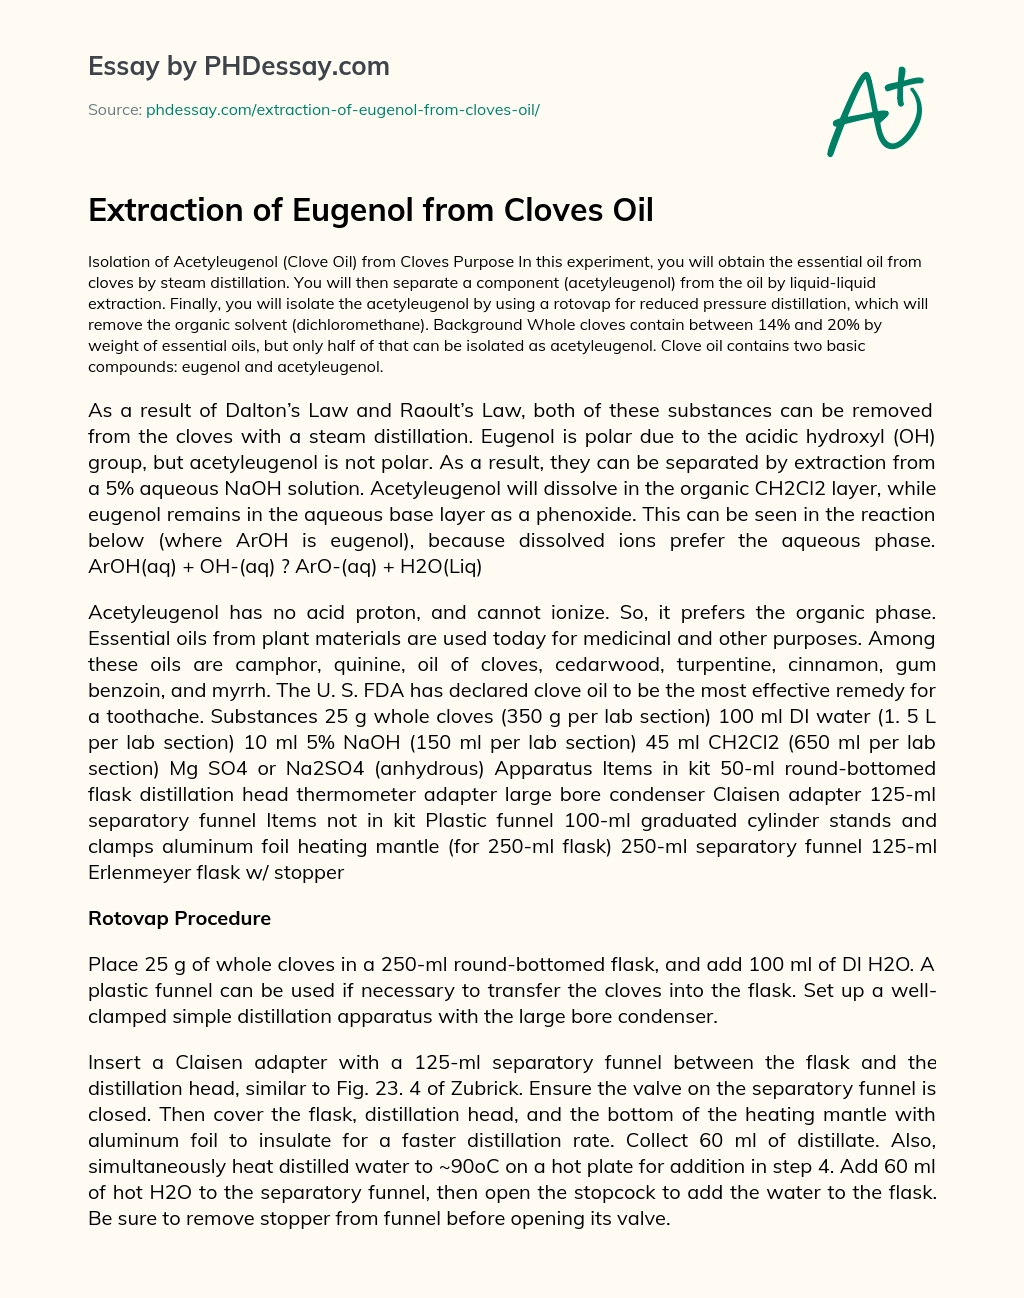 Extraction of Eugenol from Cloves Oil essay